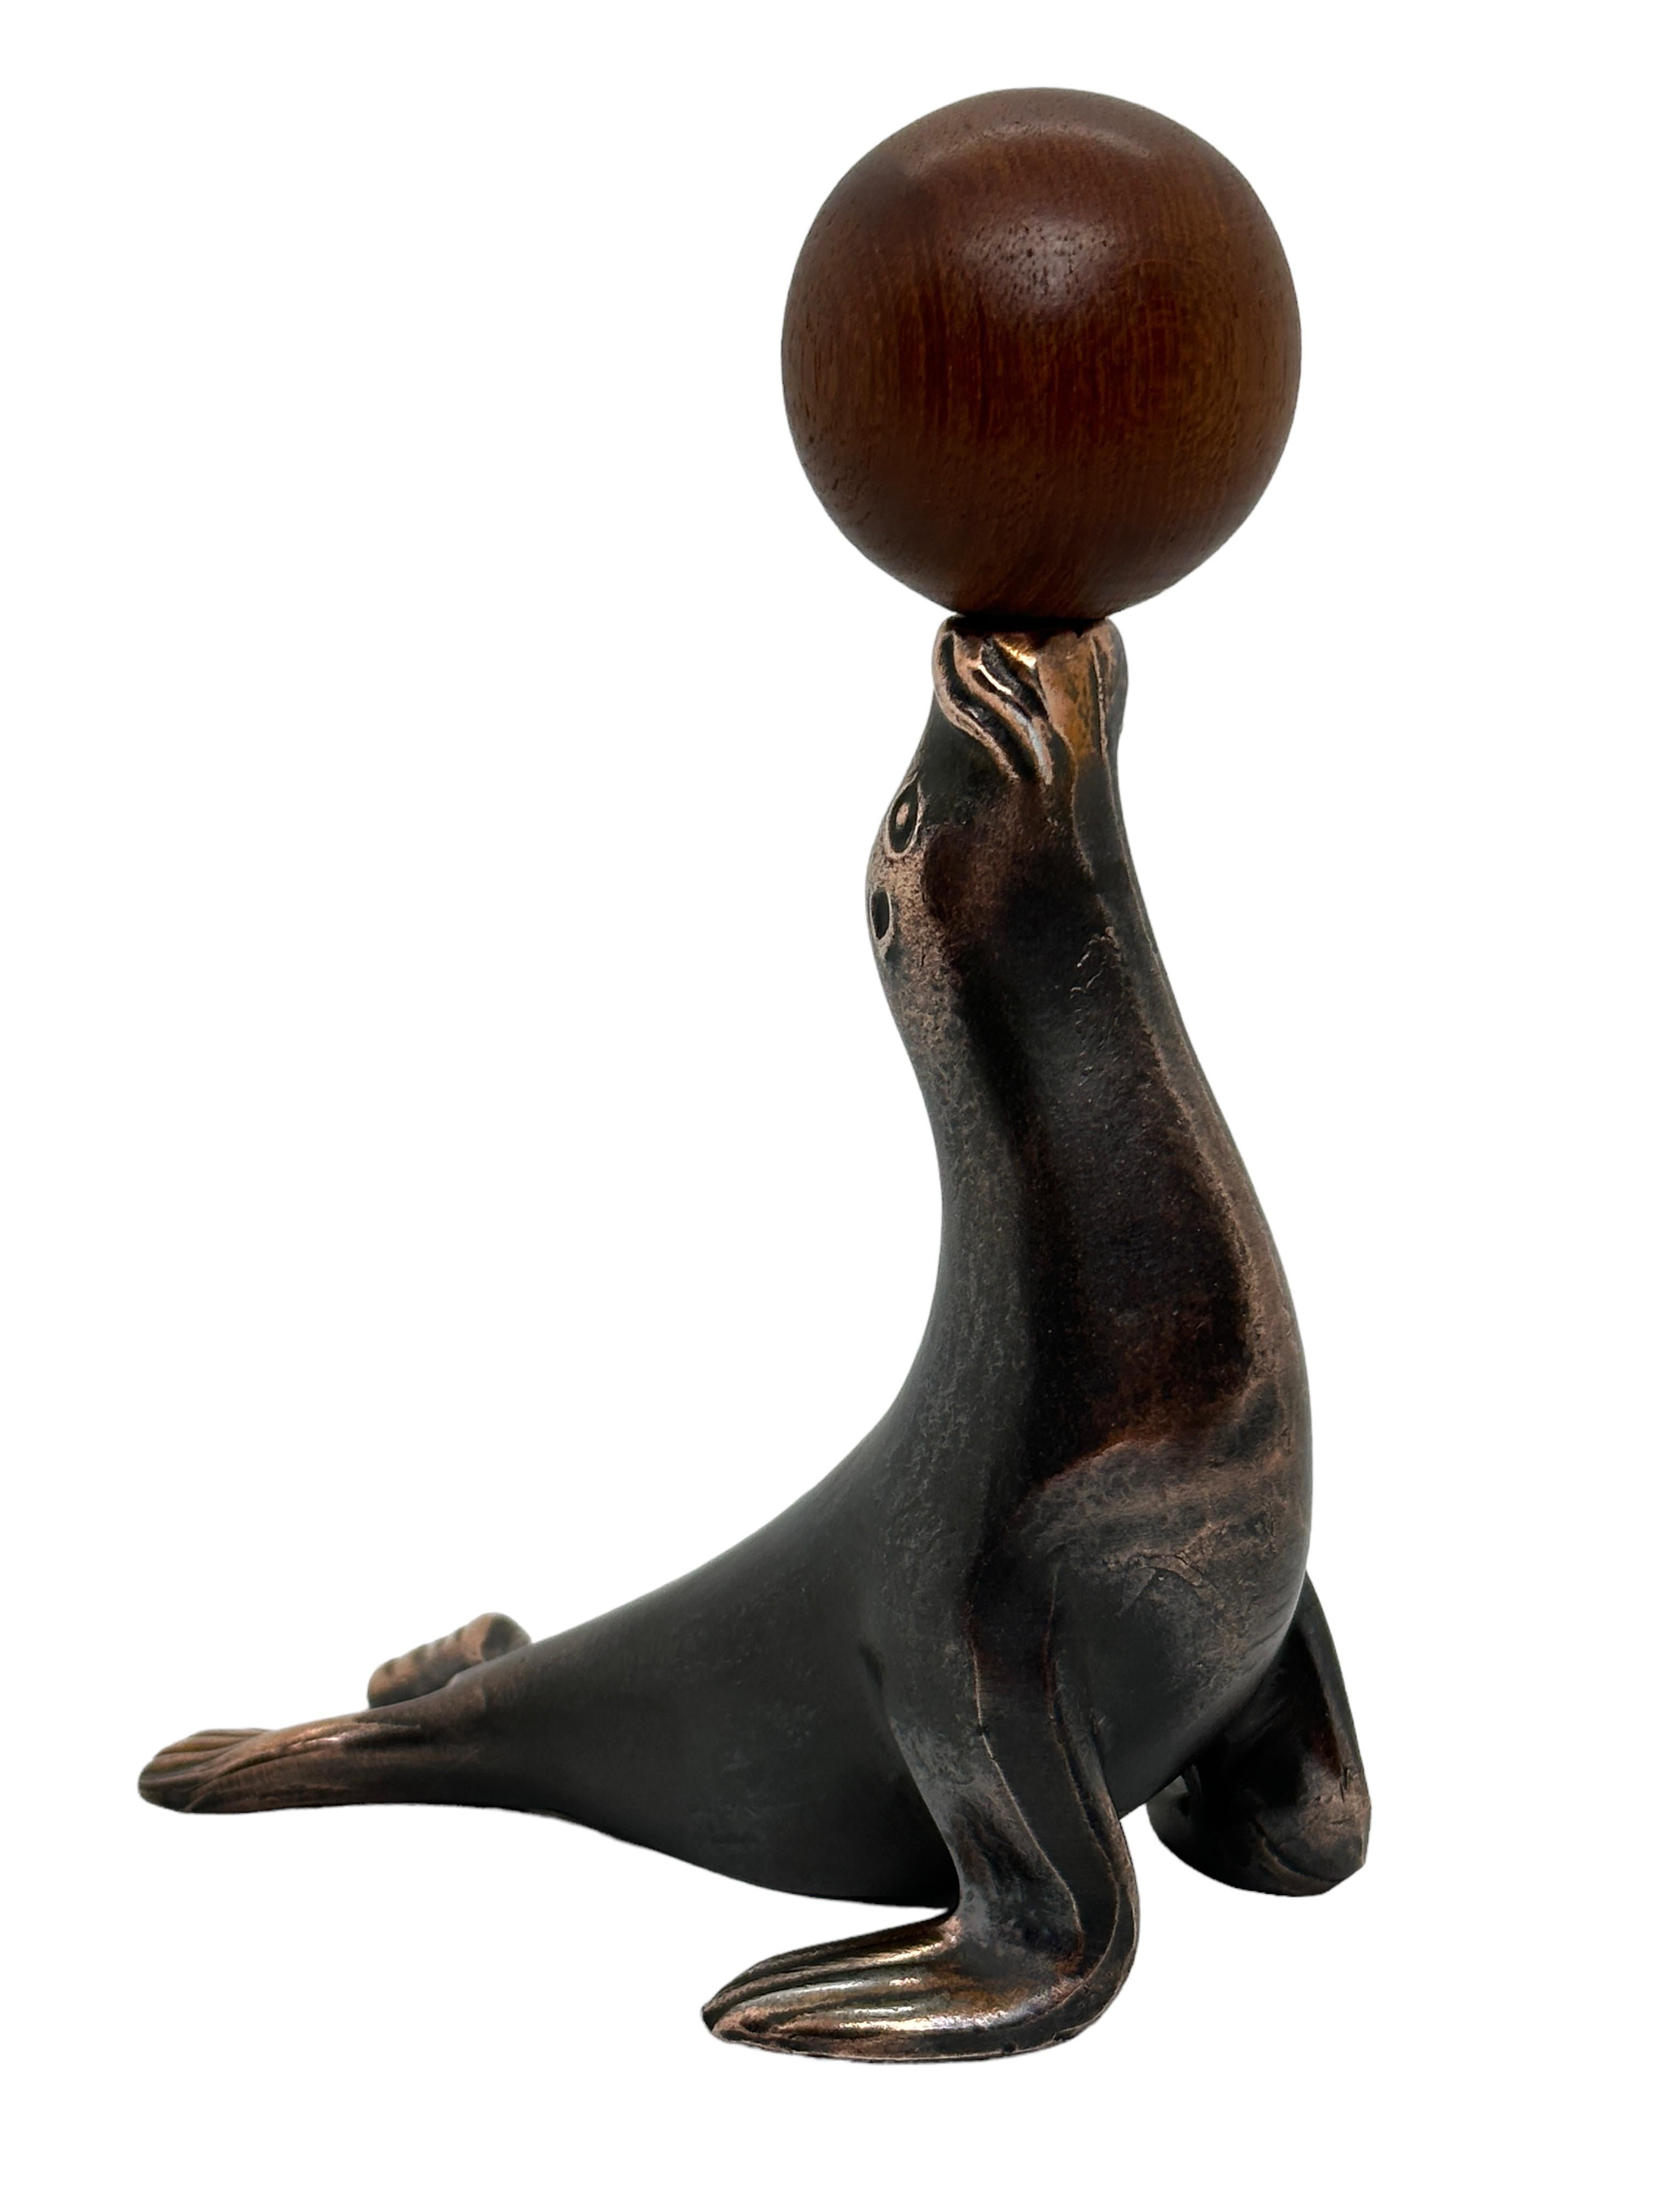 Classic early 1960s or older Austrian corkscrew in the form of a sea lion or seal balancing a ball. The ball is also the handle for the corkscrew. Beautiful addition to your room or just for your collection of corkscrews or your bar cart. Found at